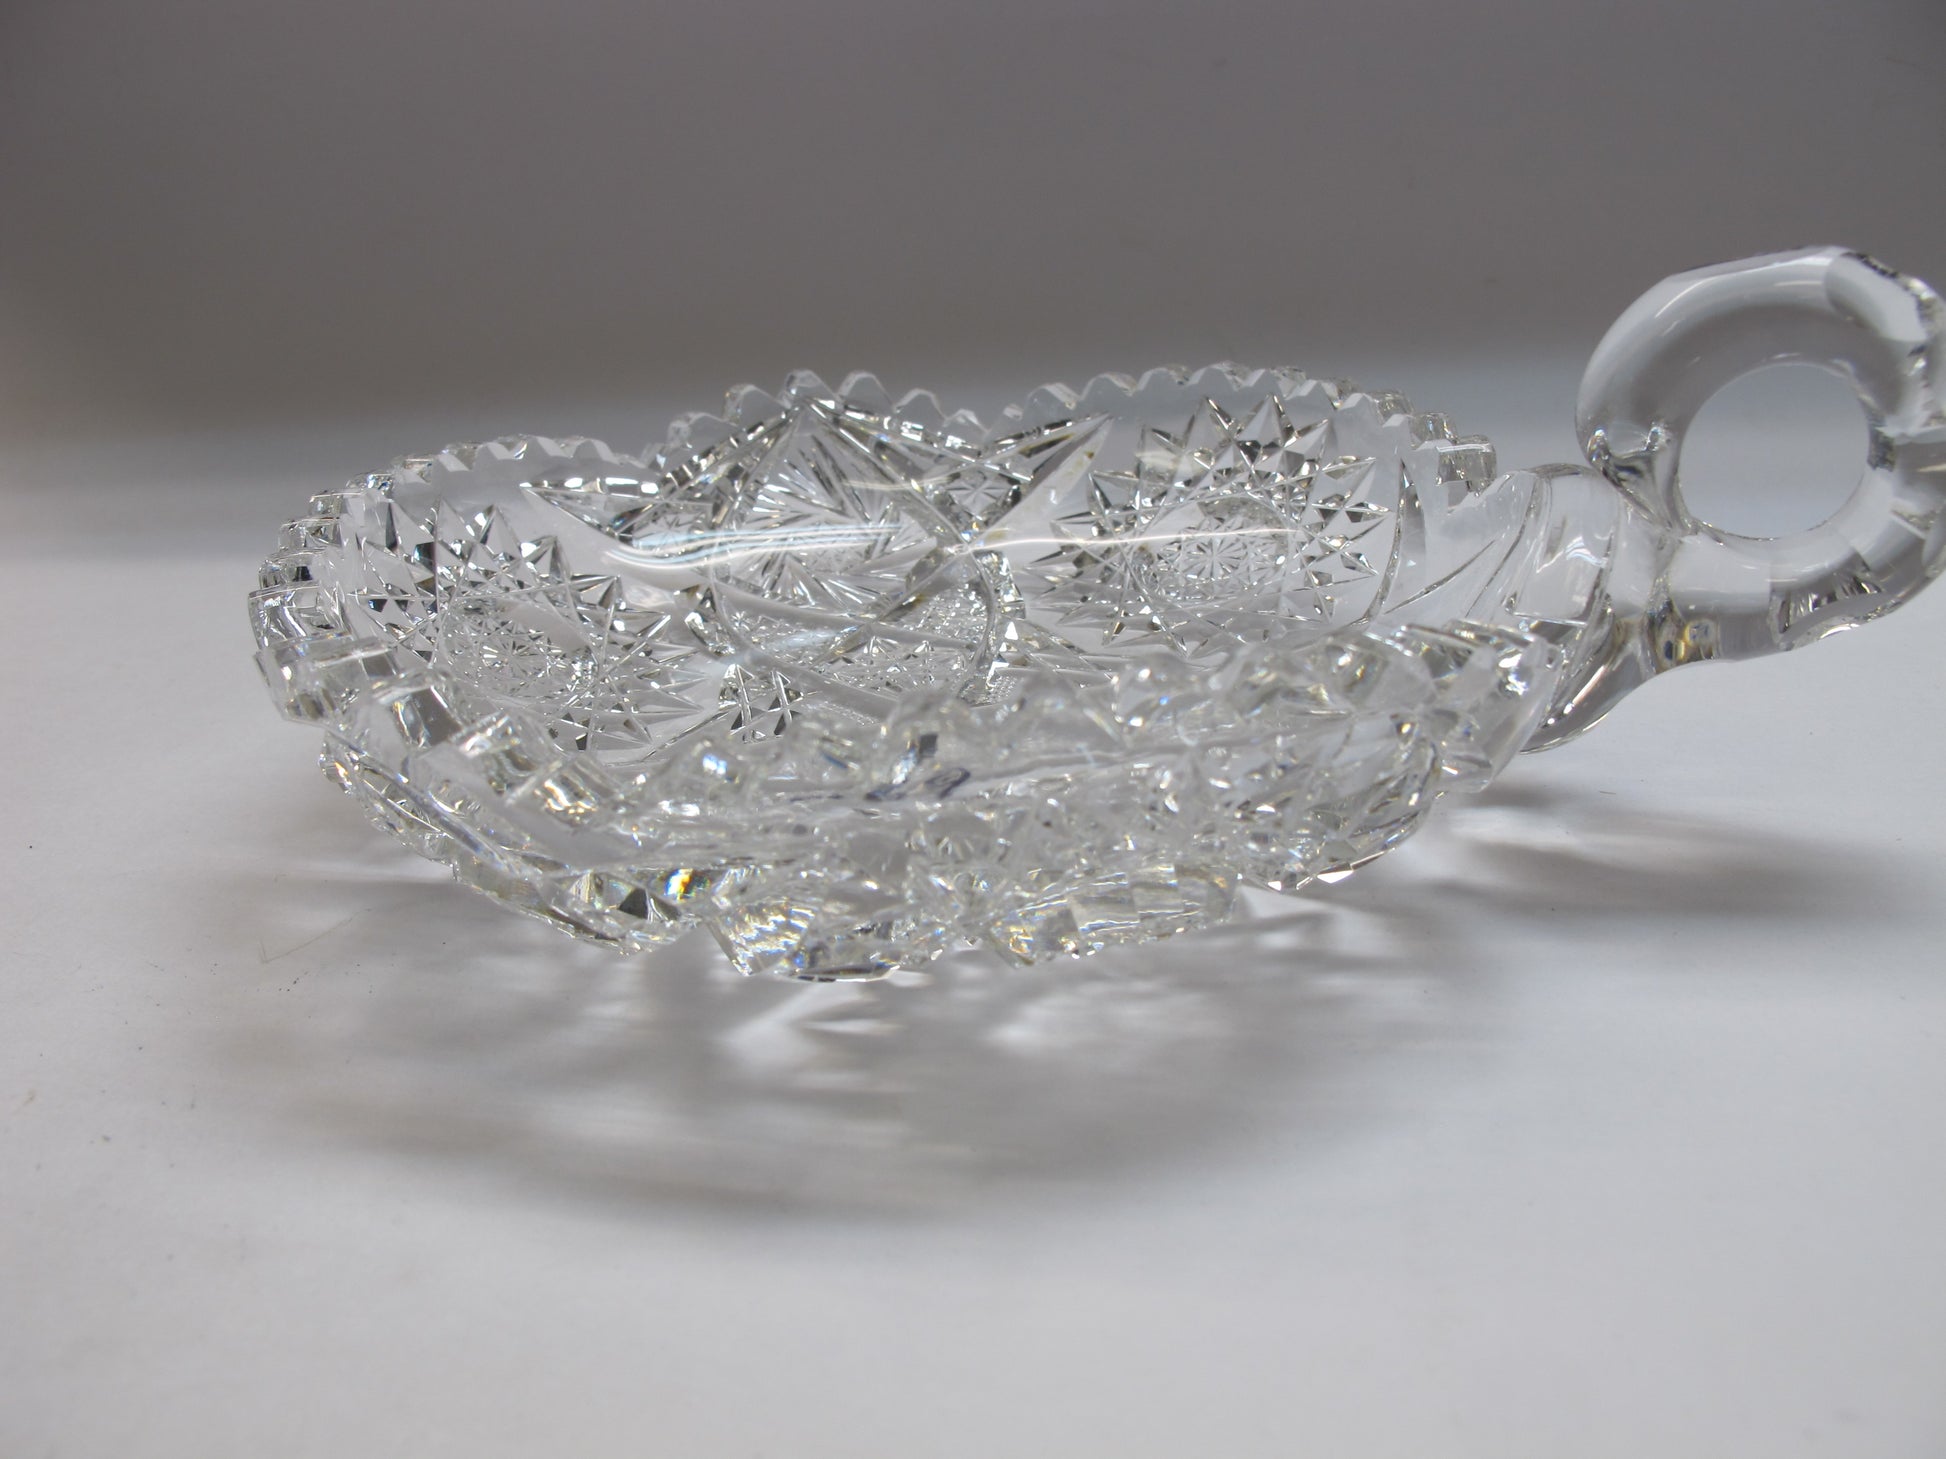 American Brilliant Period 6" Nappy cut glass Antique auction - O'Rourke crystal awards & gifts abp cut glass